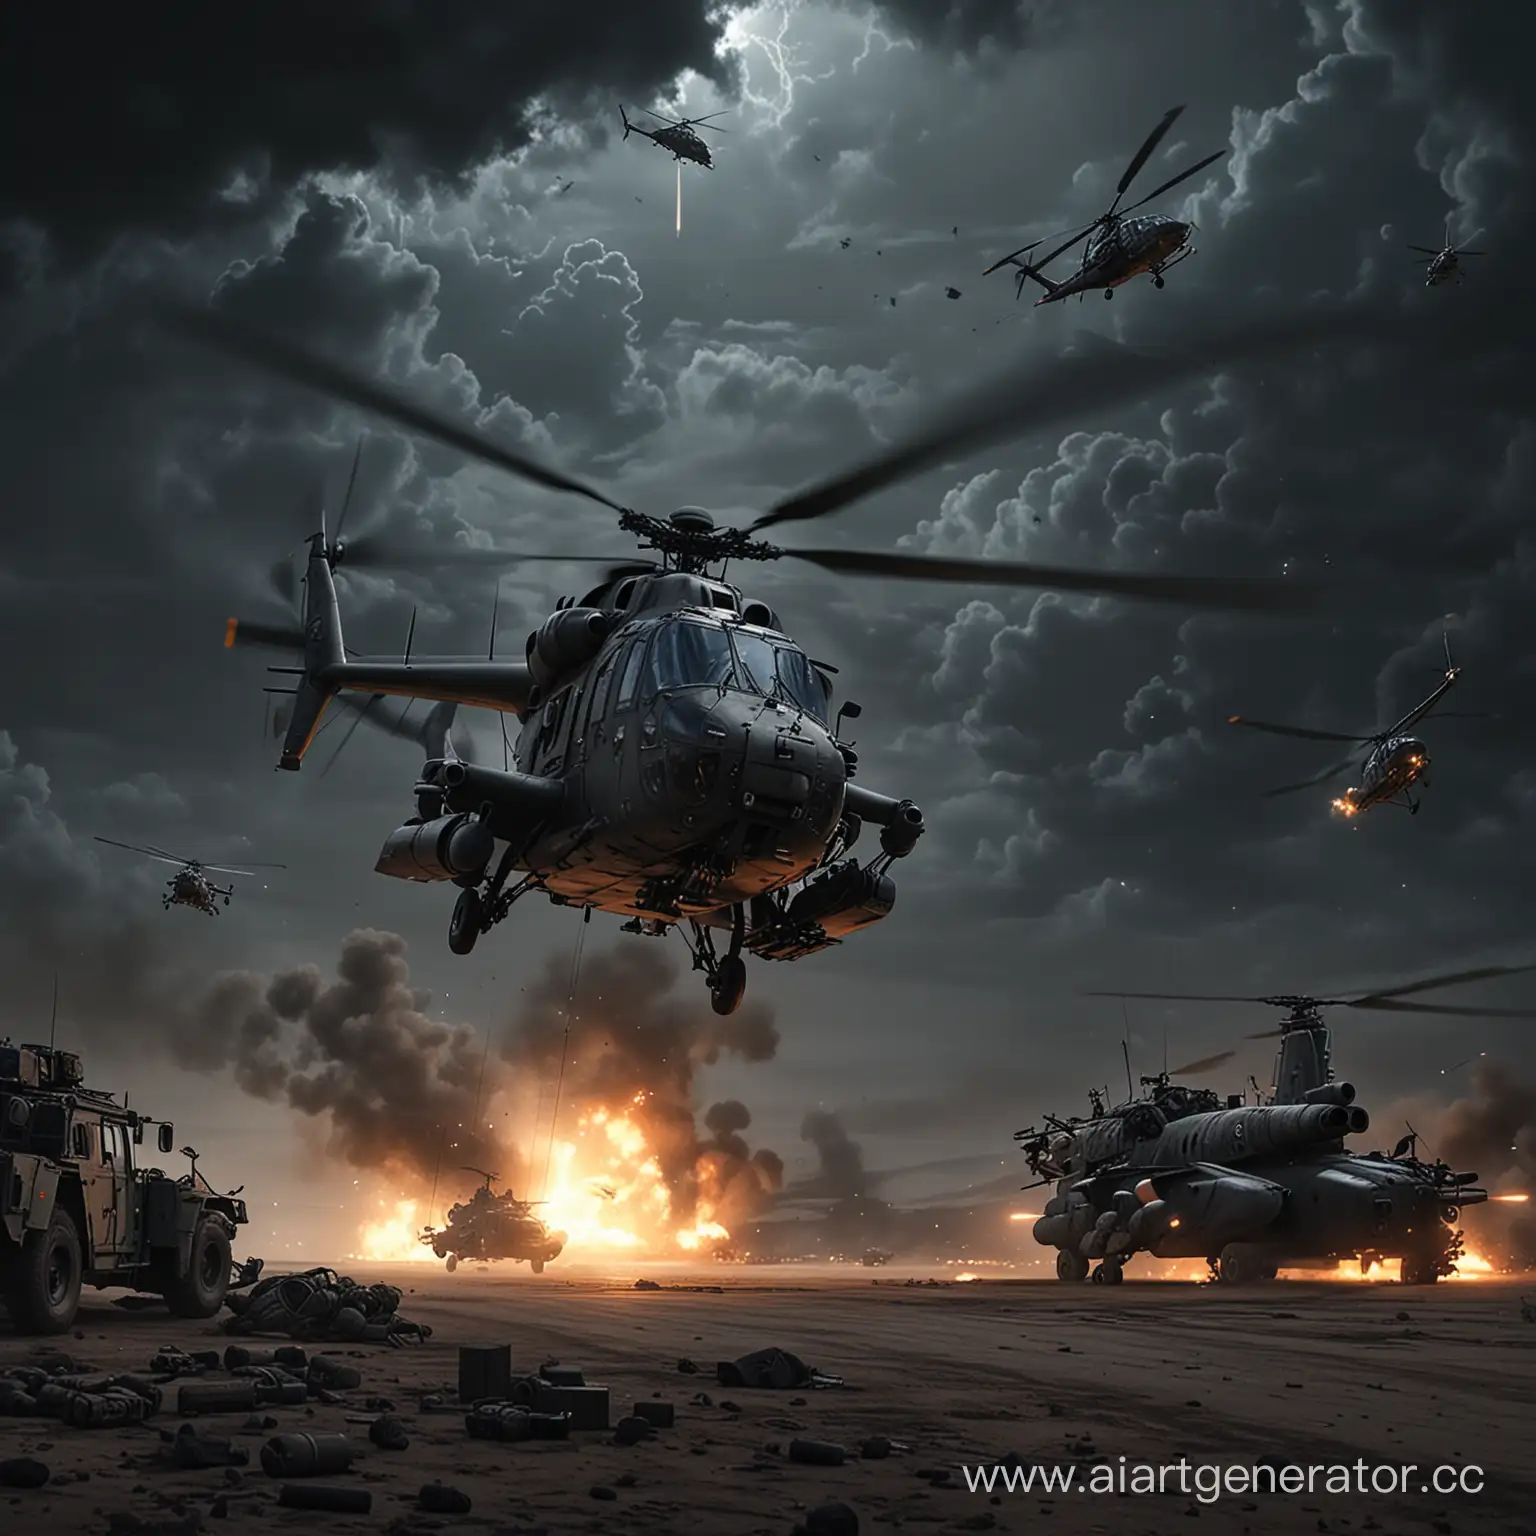 Nighttime-Military-Assault-with-Helicopters-and-Heavy-Weaponry